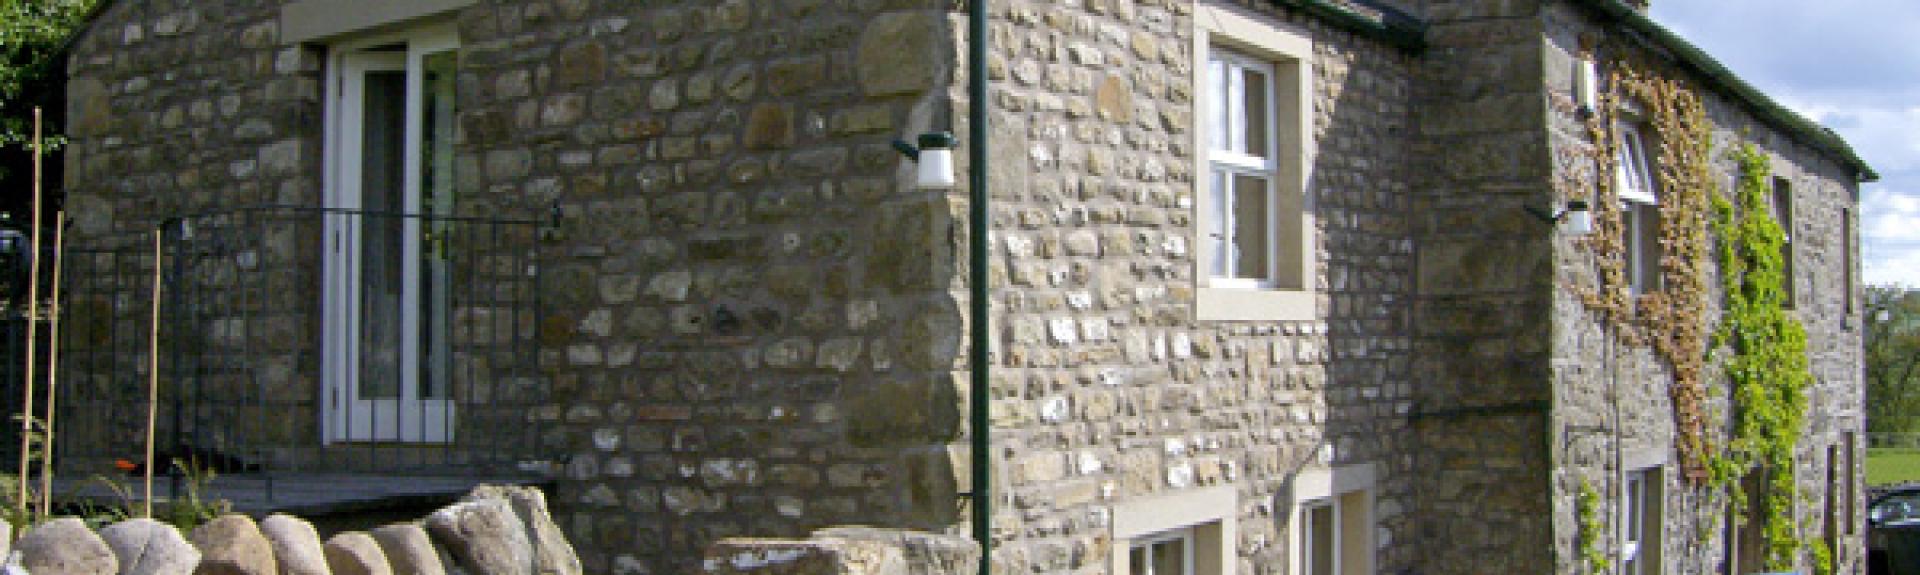 A2-storey, end of terrace stone-built holiday cottage in Settle with a walled side garden.